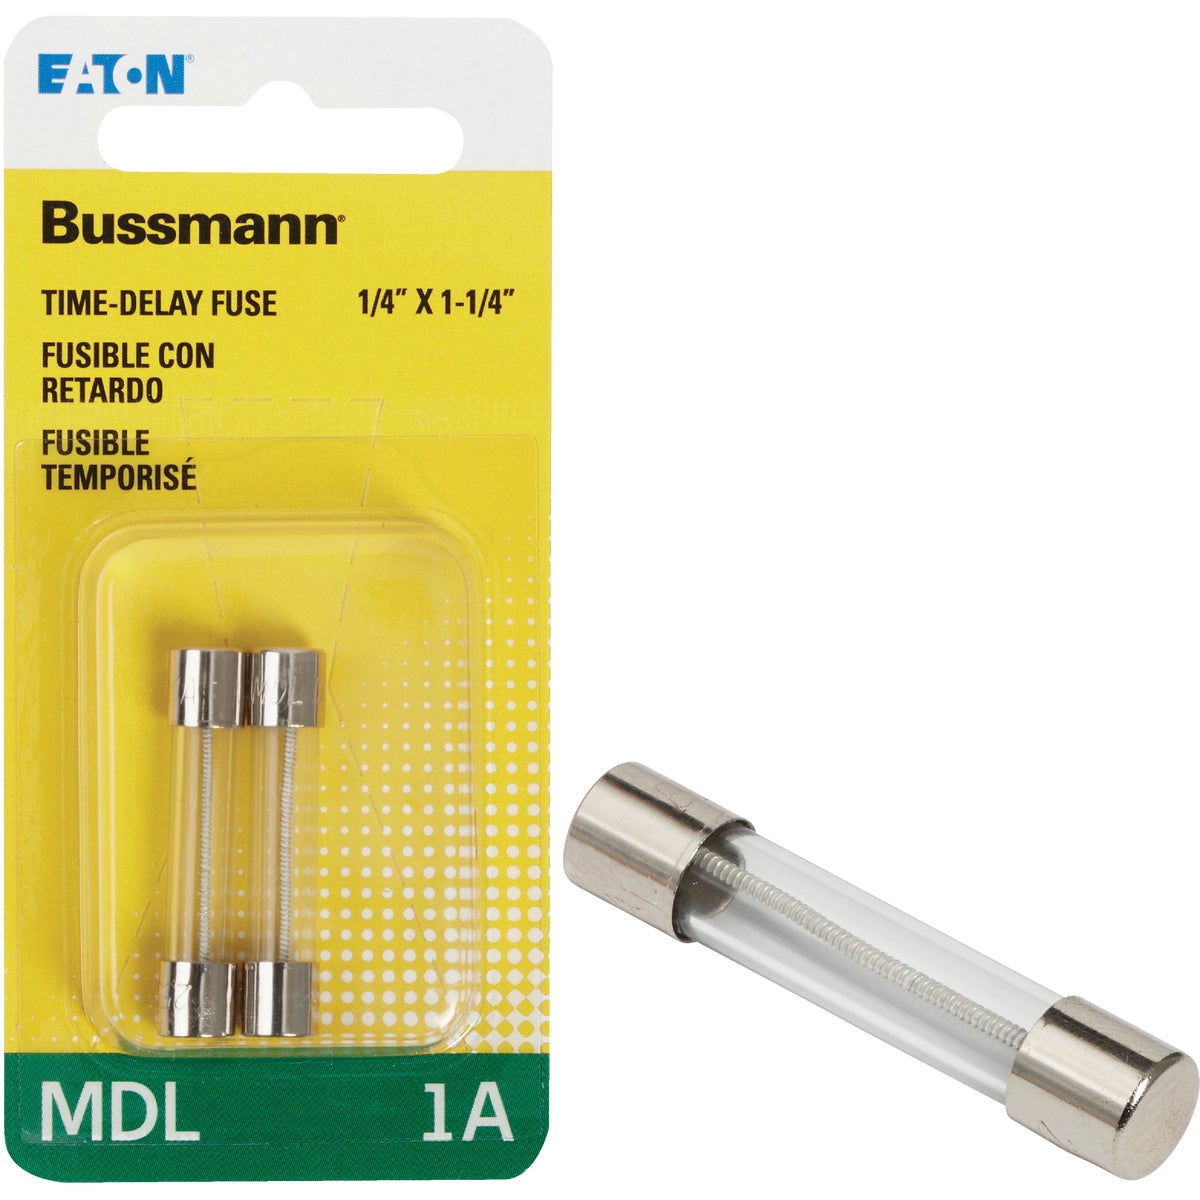 Bussmann 1A MDL Glass Tube Electronic Fuse (2-Pack)